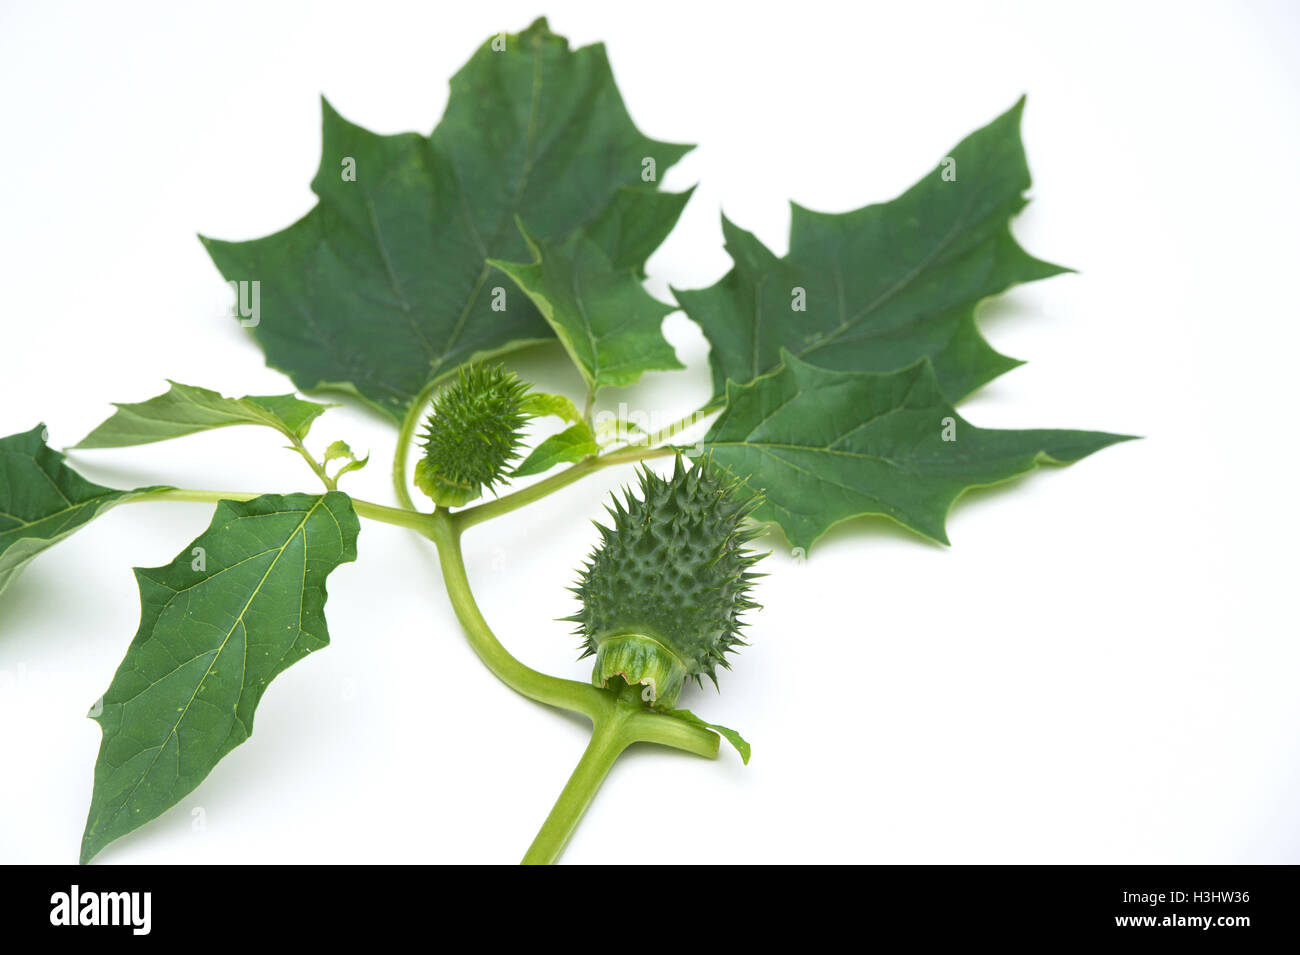 Datura stramonium. Thorn apple prickly seed pod and leaves on white background Stock Photo